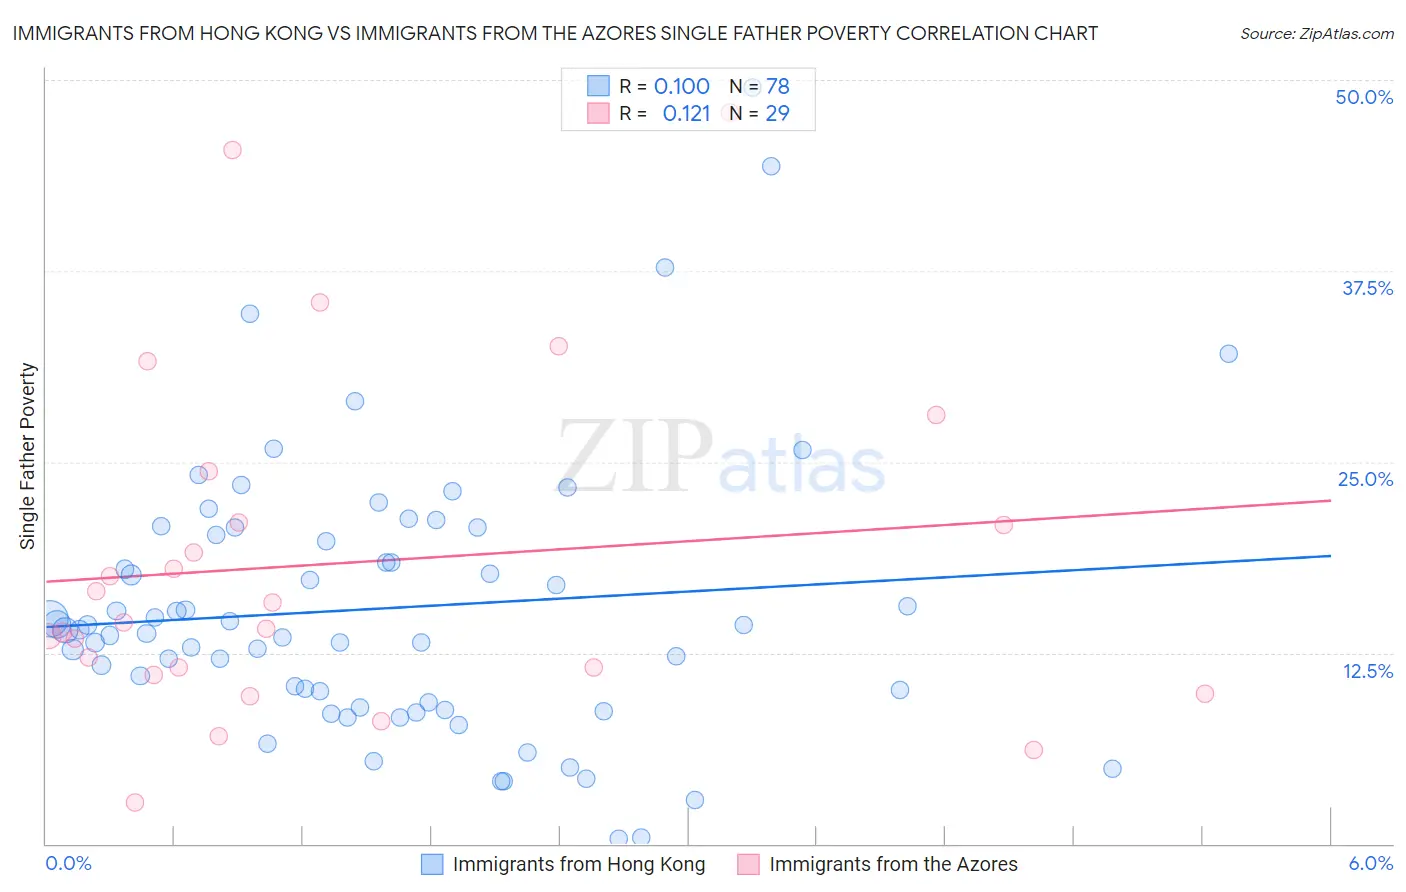 Immigrants from Hong Kong vs Immigrants from the Azores Single Father Poverty